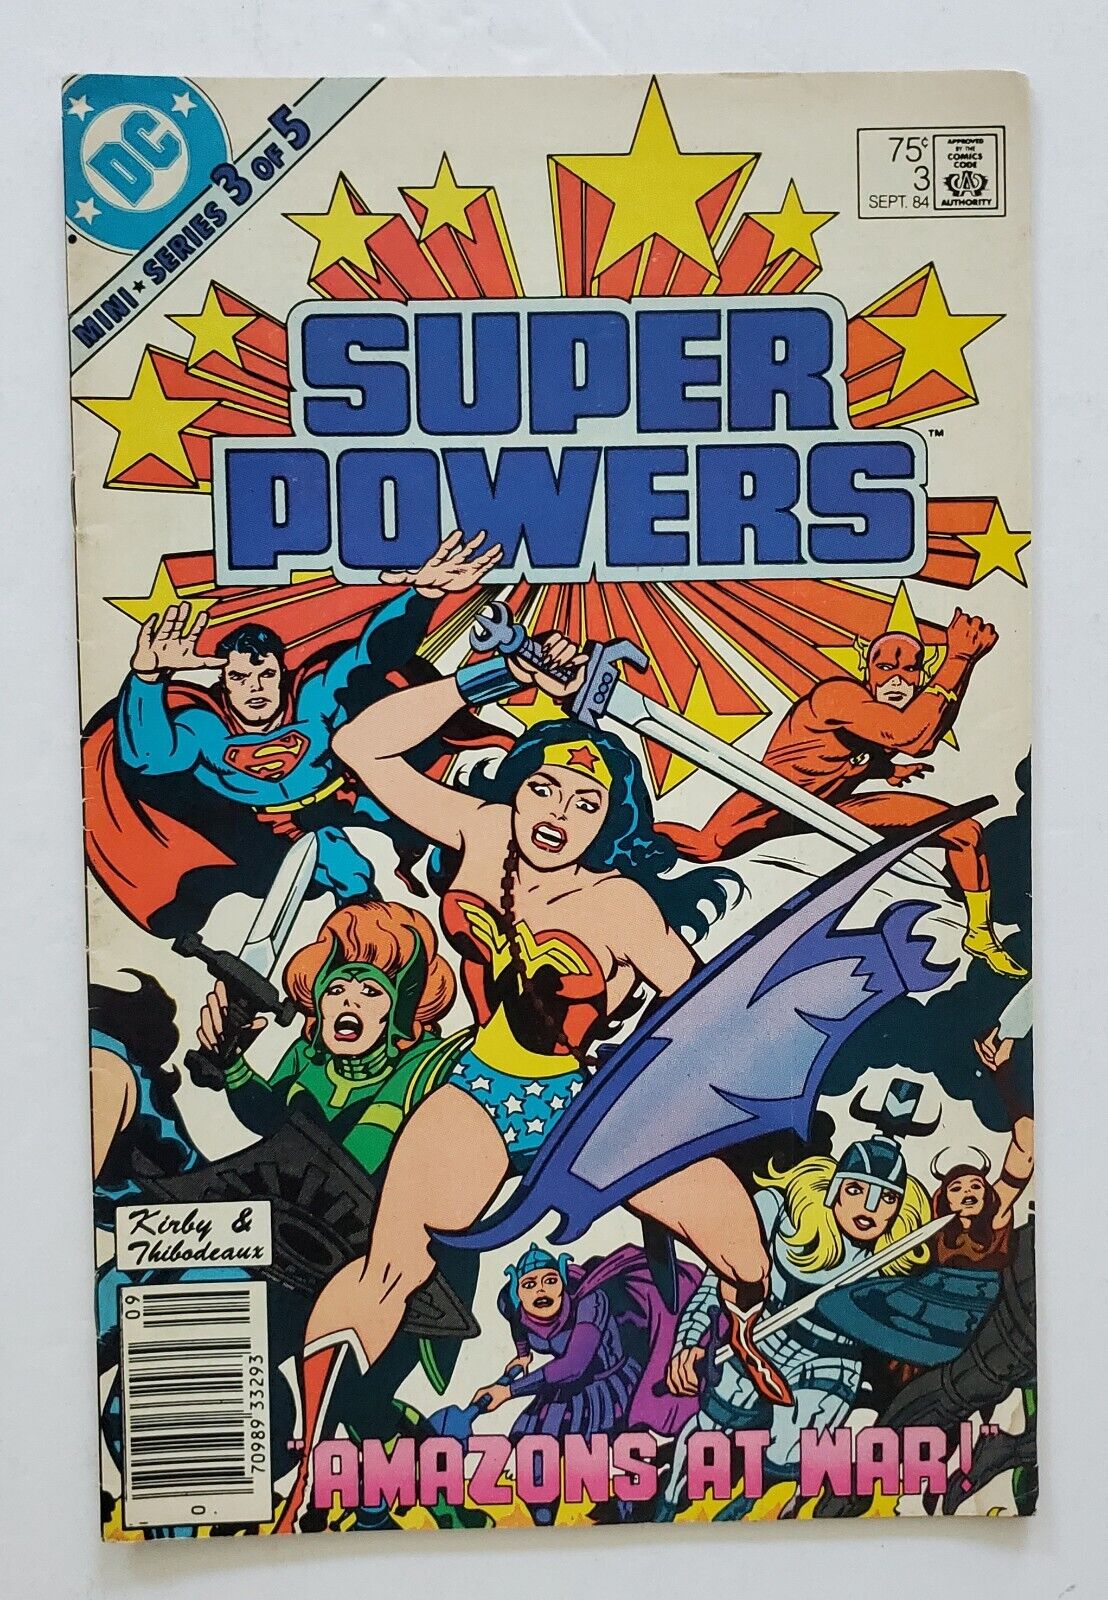 Super Powers (DC, 1984 series) #3 $0.75 W.W. & MASTERS OF THE UNIVERSE ON BACK.